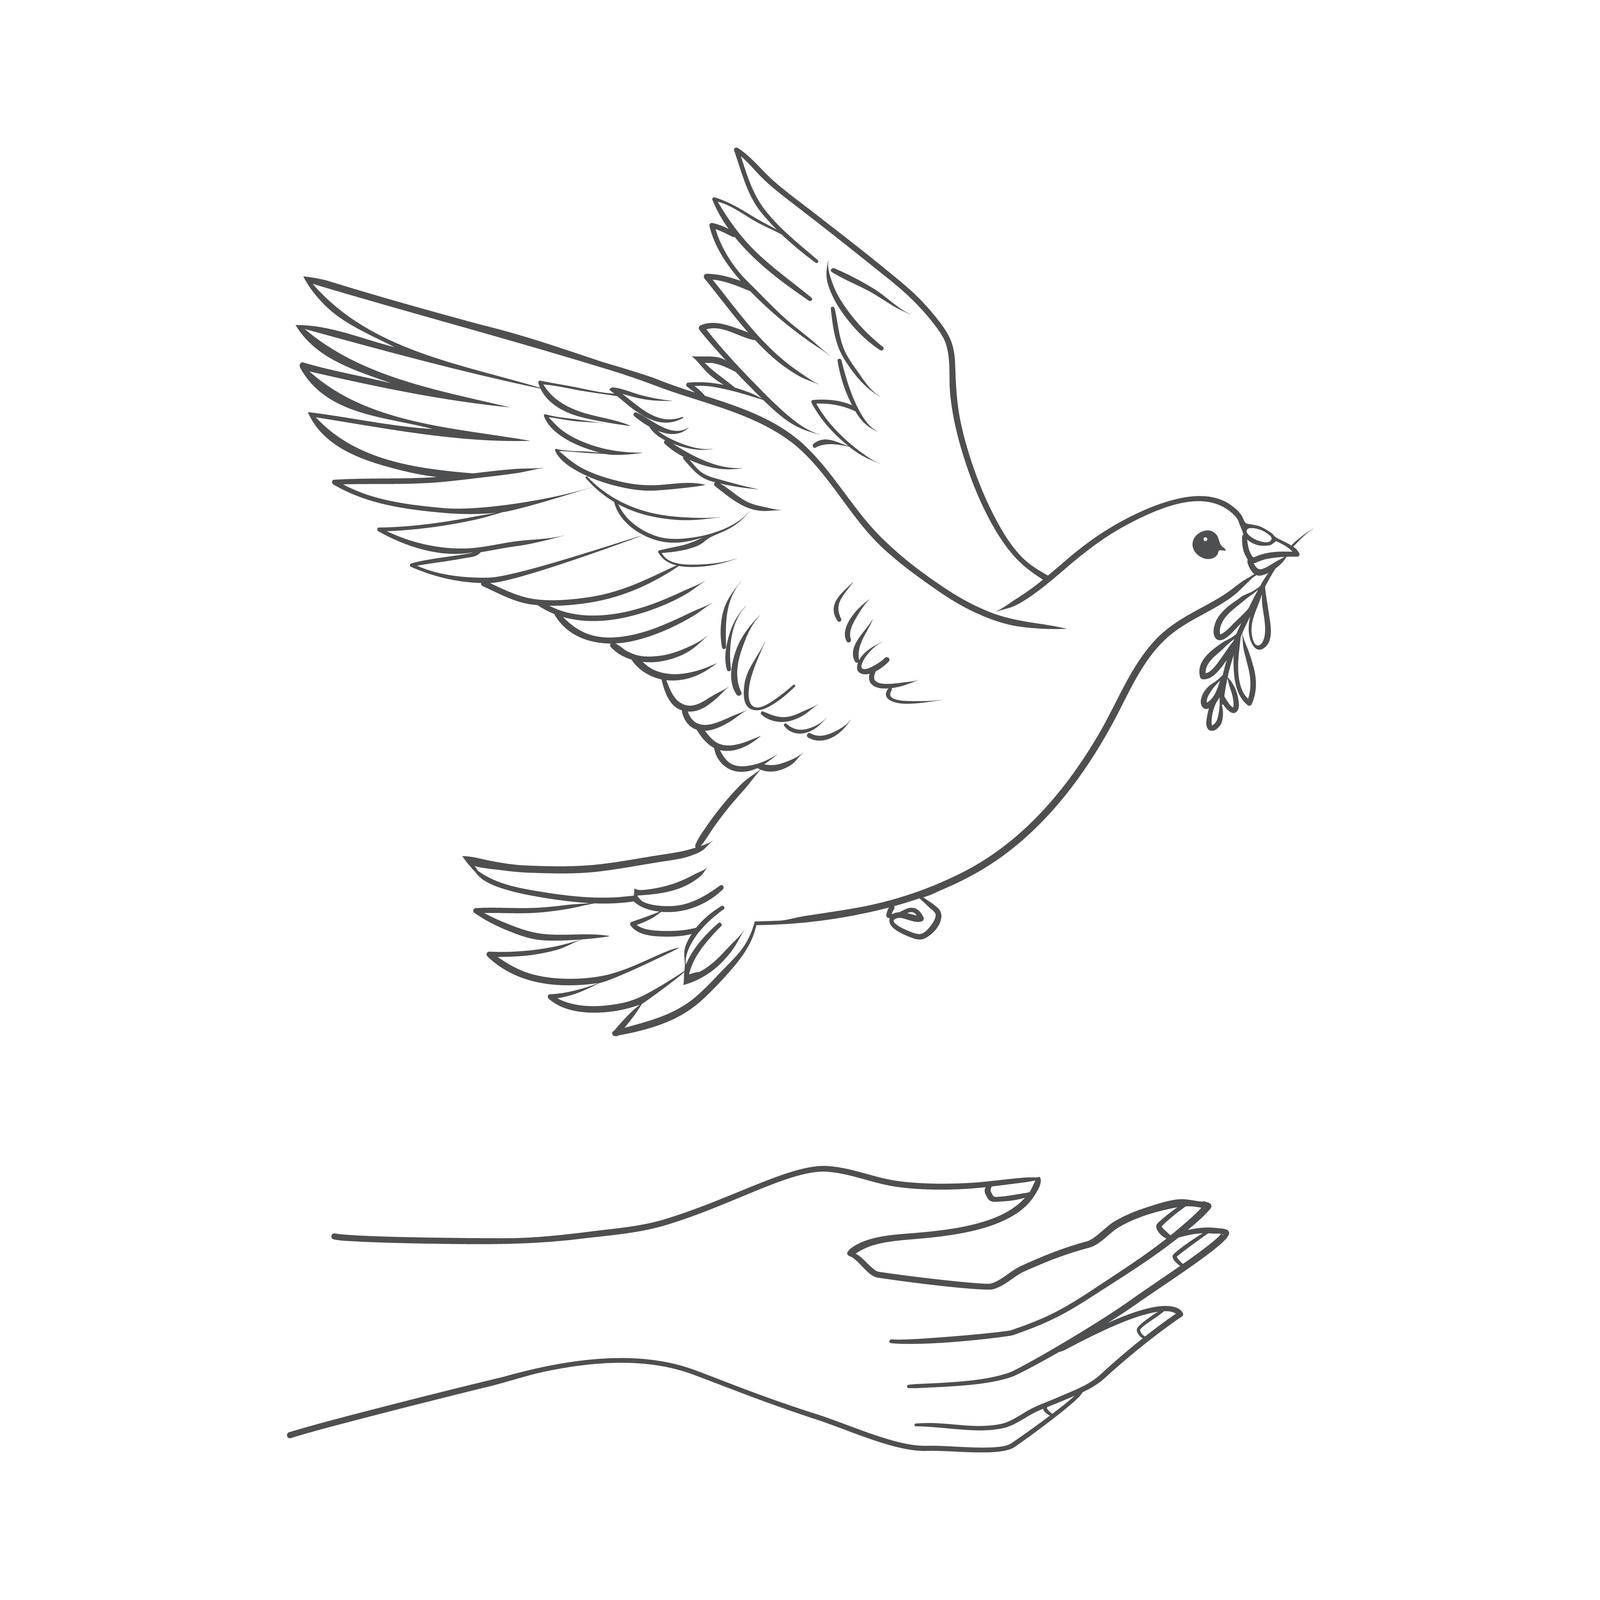 Peace dove with olive branch in the beak flying and hands down. by Vladimir90